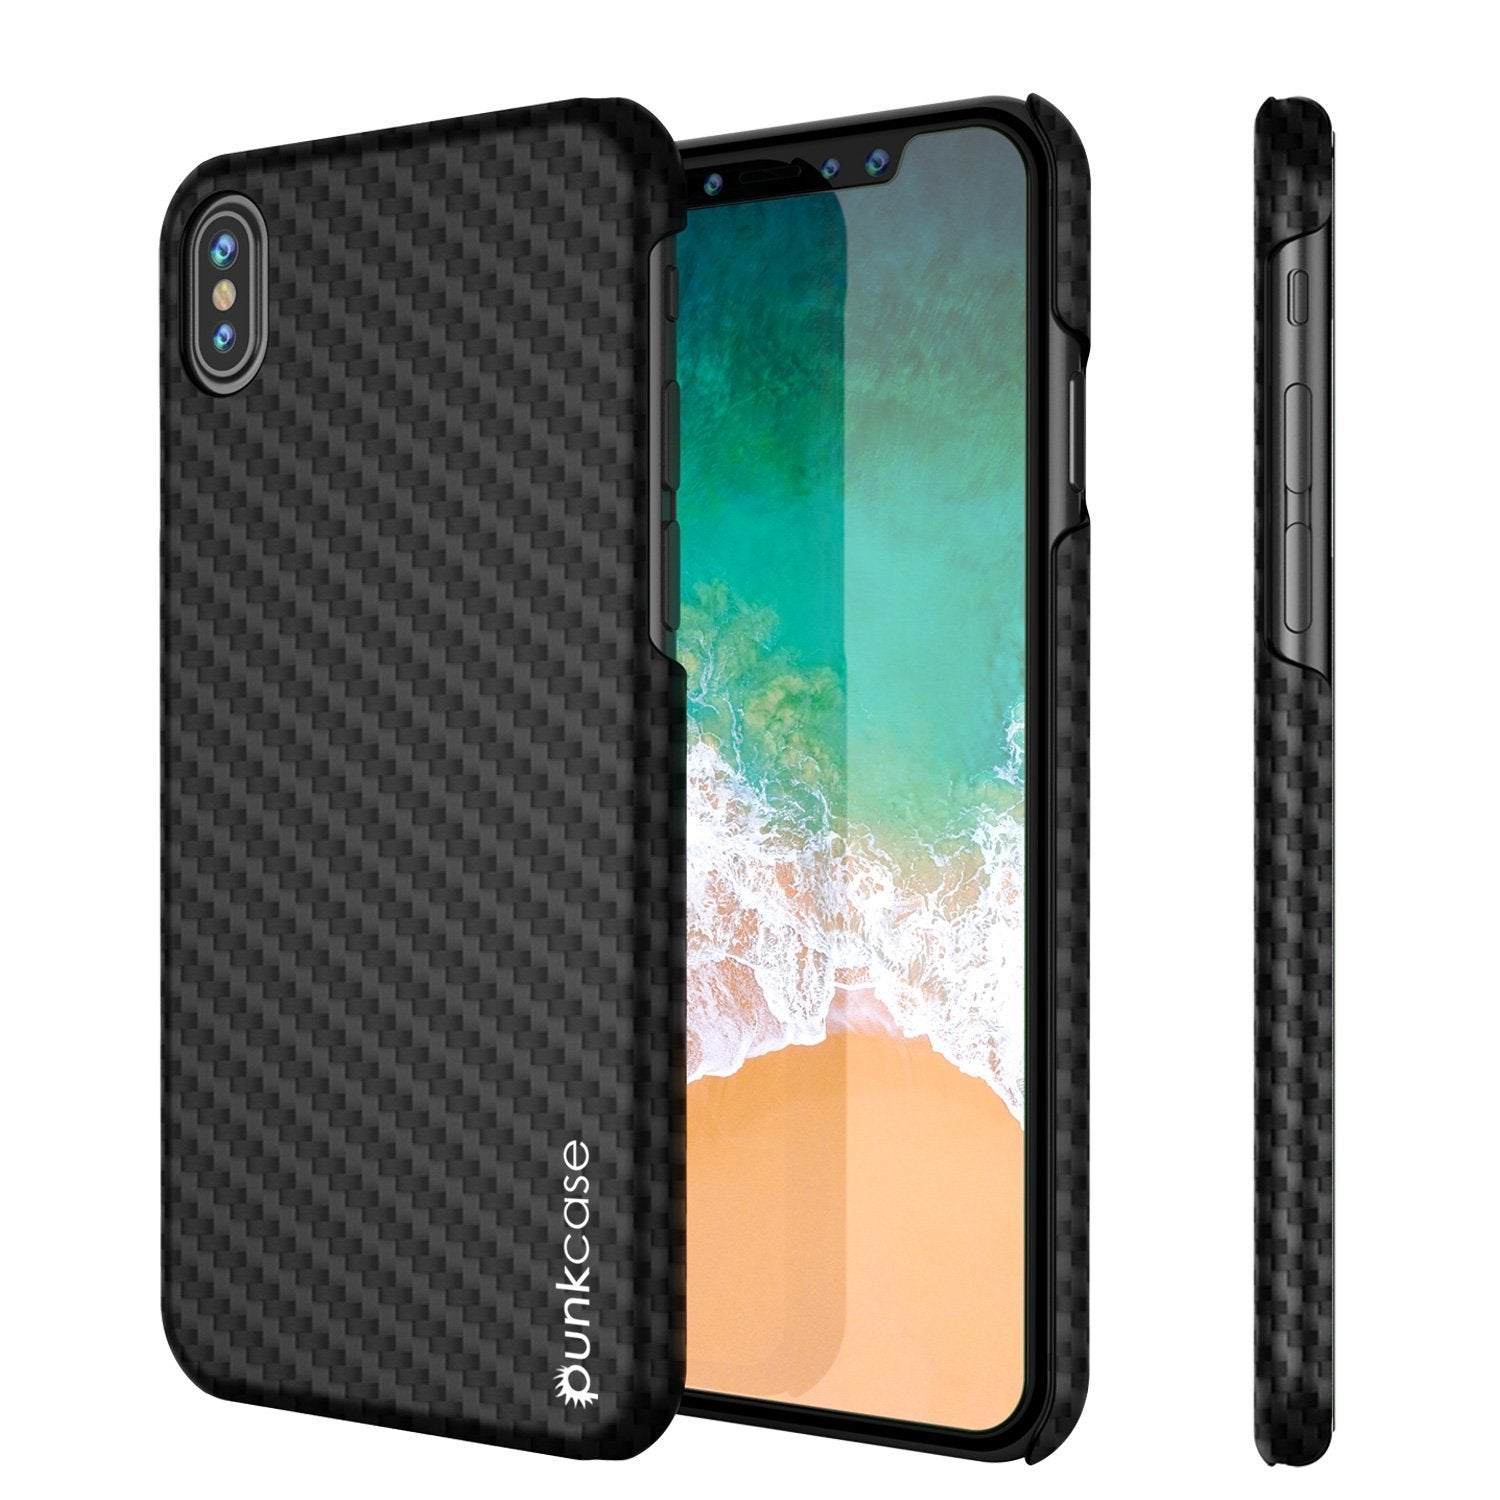 iPhone X Case, Punkcase CarbonShield, Heavy Duty & Ultra Thin 2 Piece Dual Layer [shockproof]